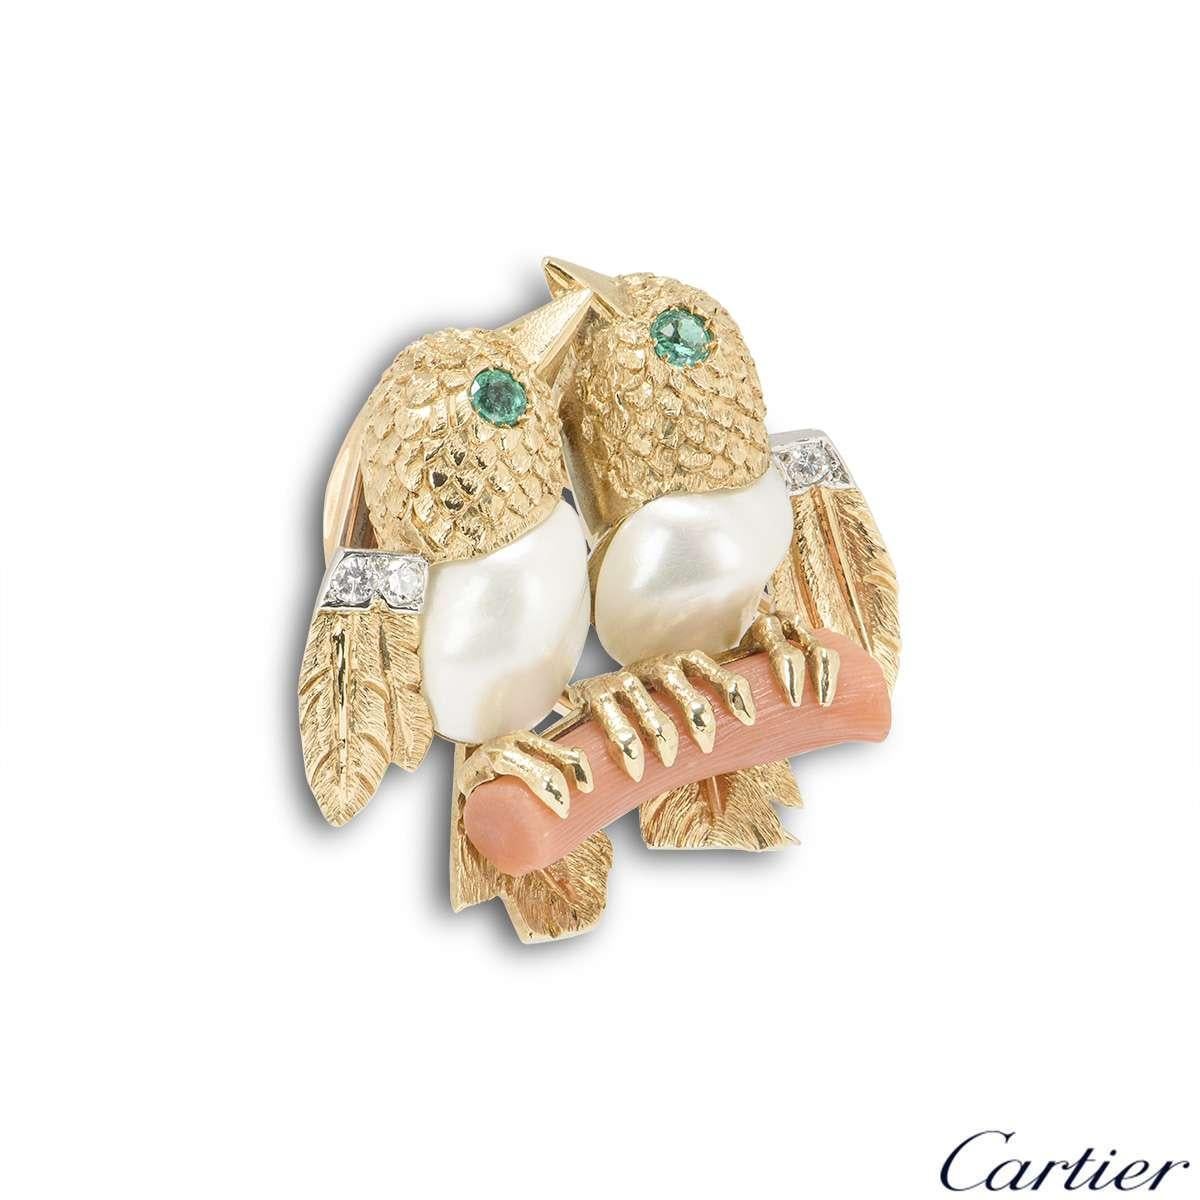 A charming 18k yellow gold Lovebird brooch by Cartier. The birds are made from textured yellow gold and pearls, with emeralds set as the eyes and 3 round brilliant cut diamonds set in the wings, perched on a coral branch. The brooch measures 2.5cm